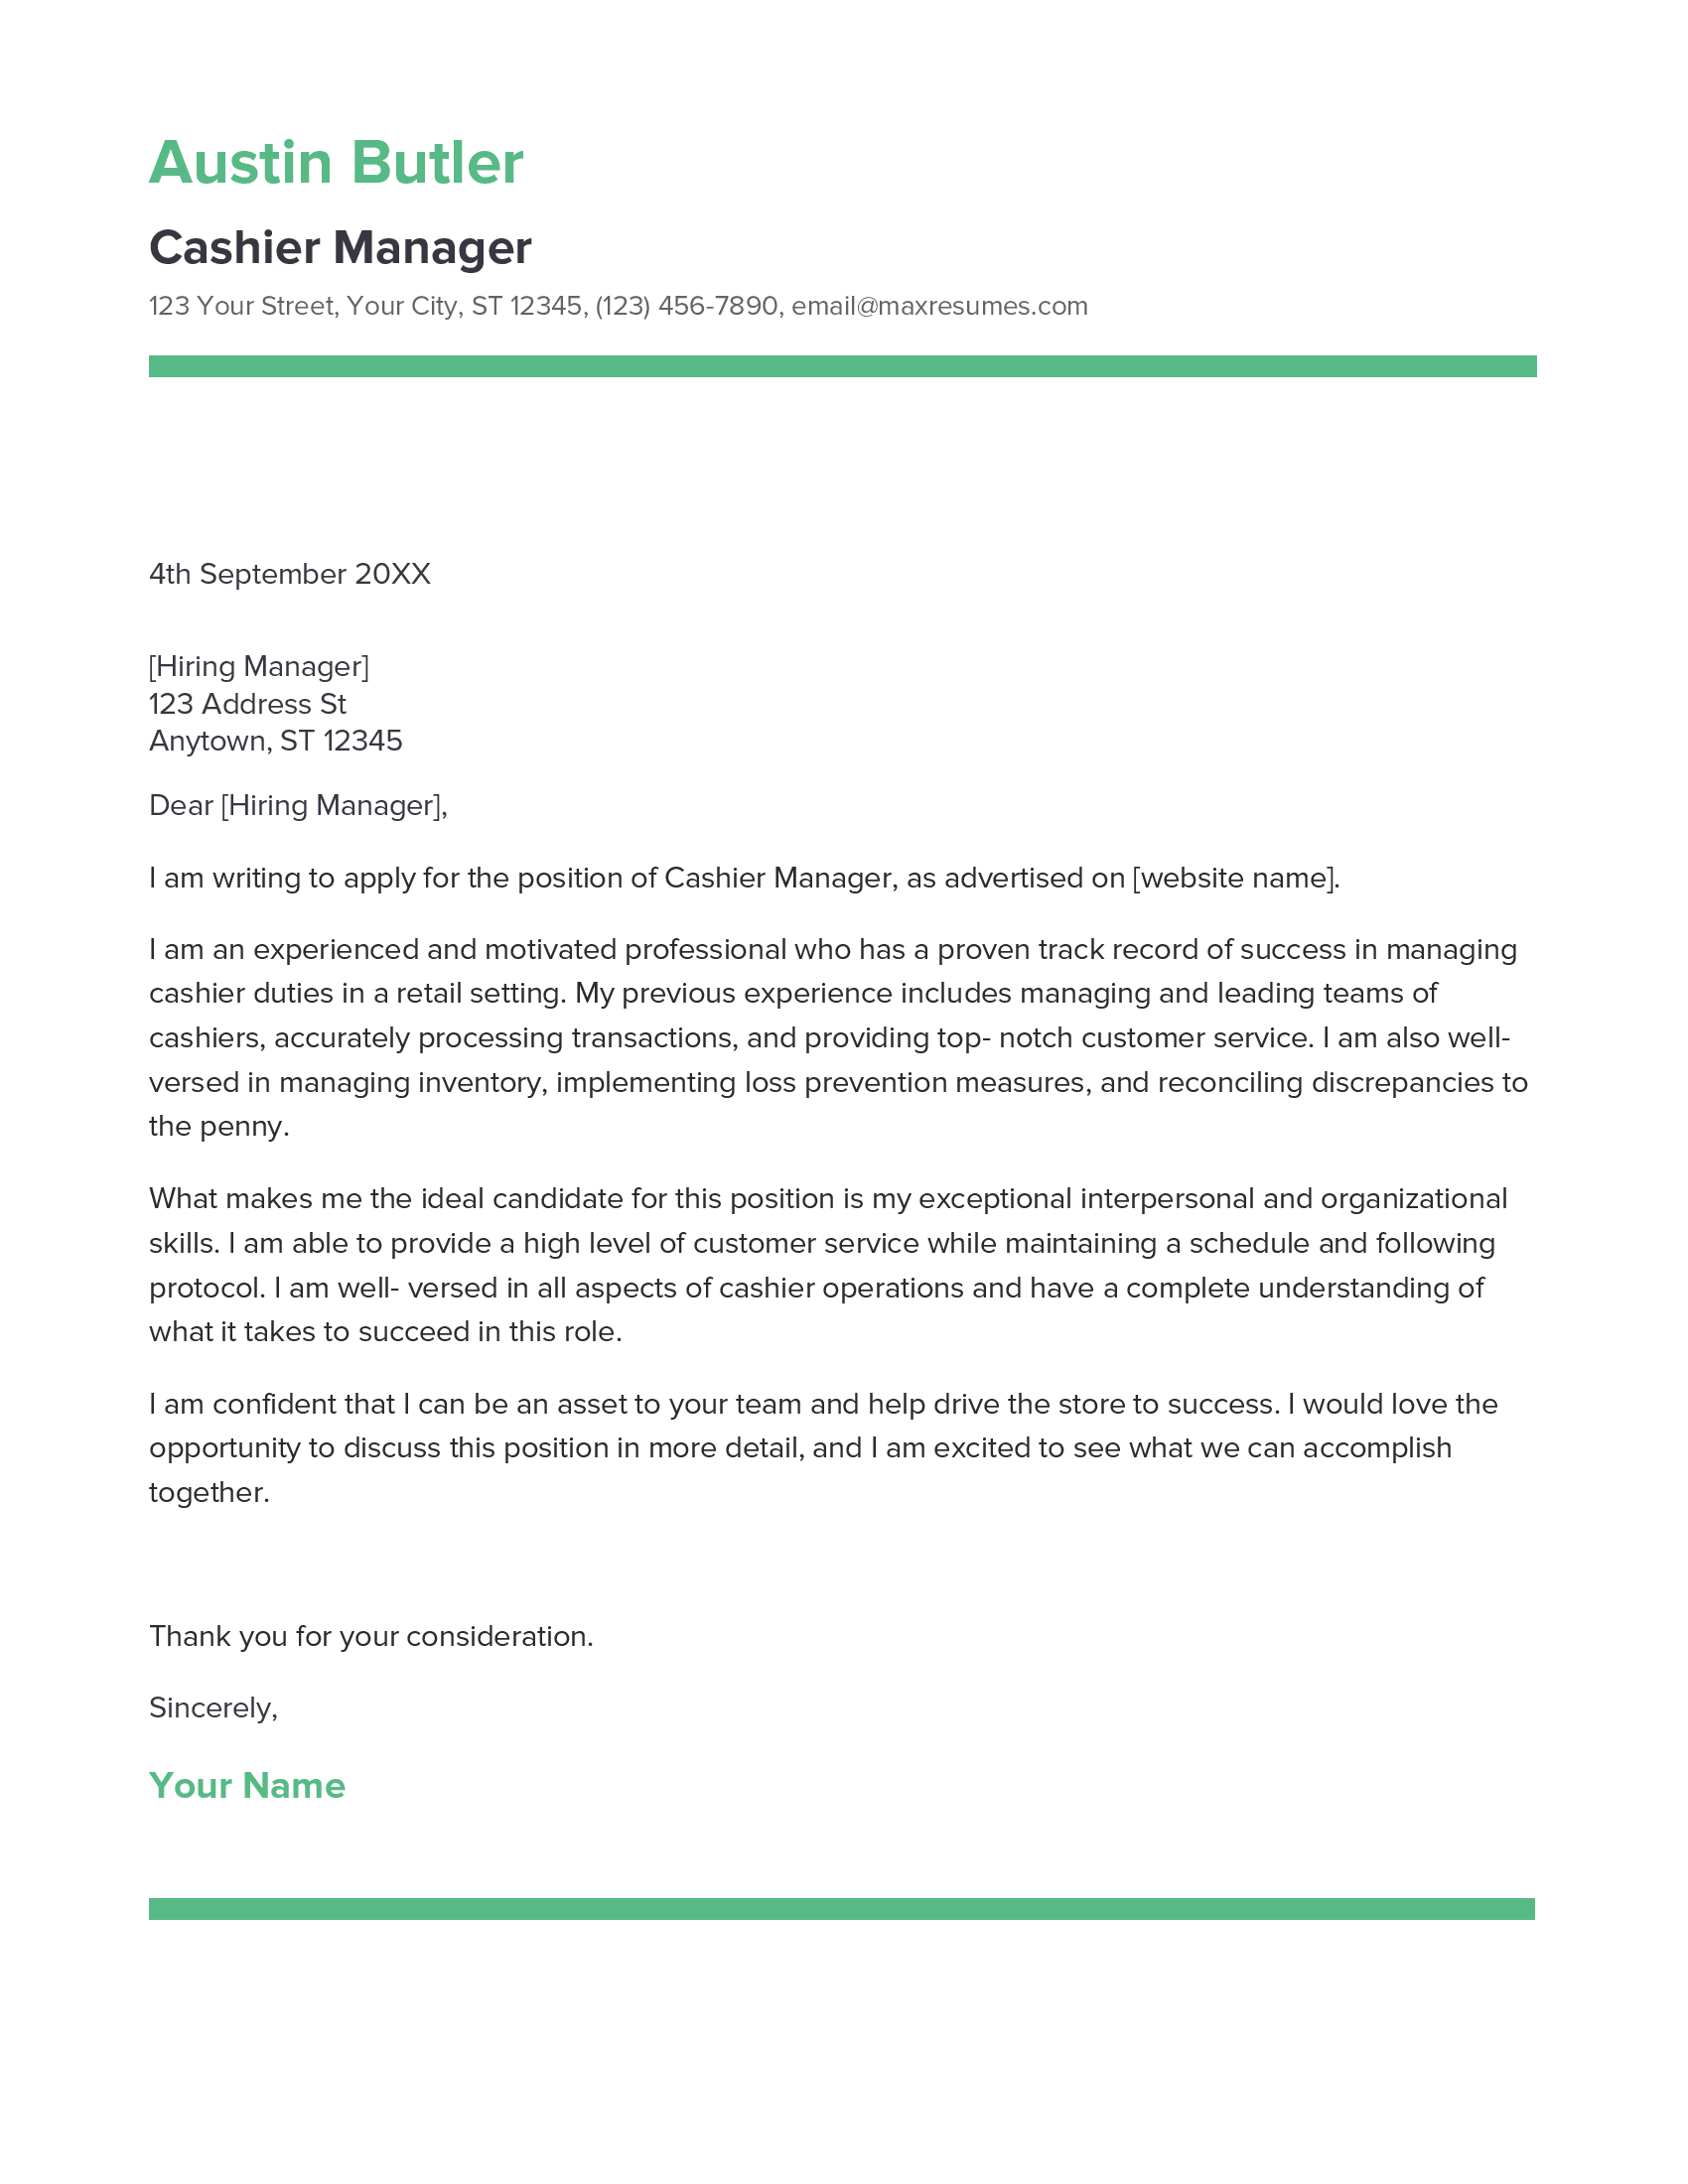 Cashier Manager Cover Letter Example